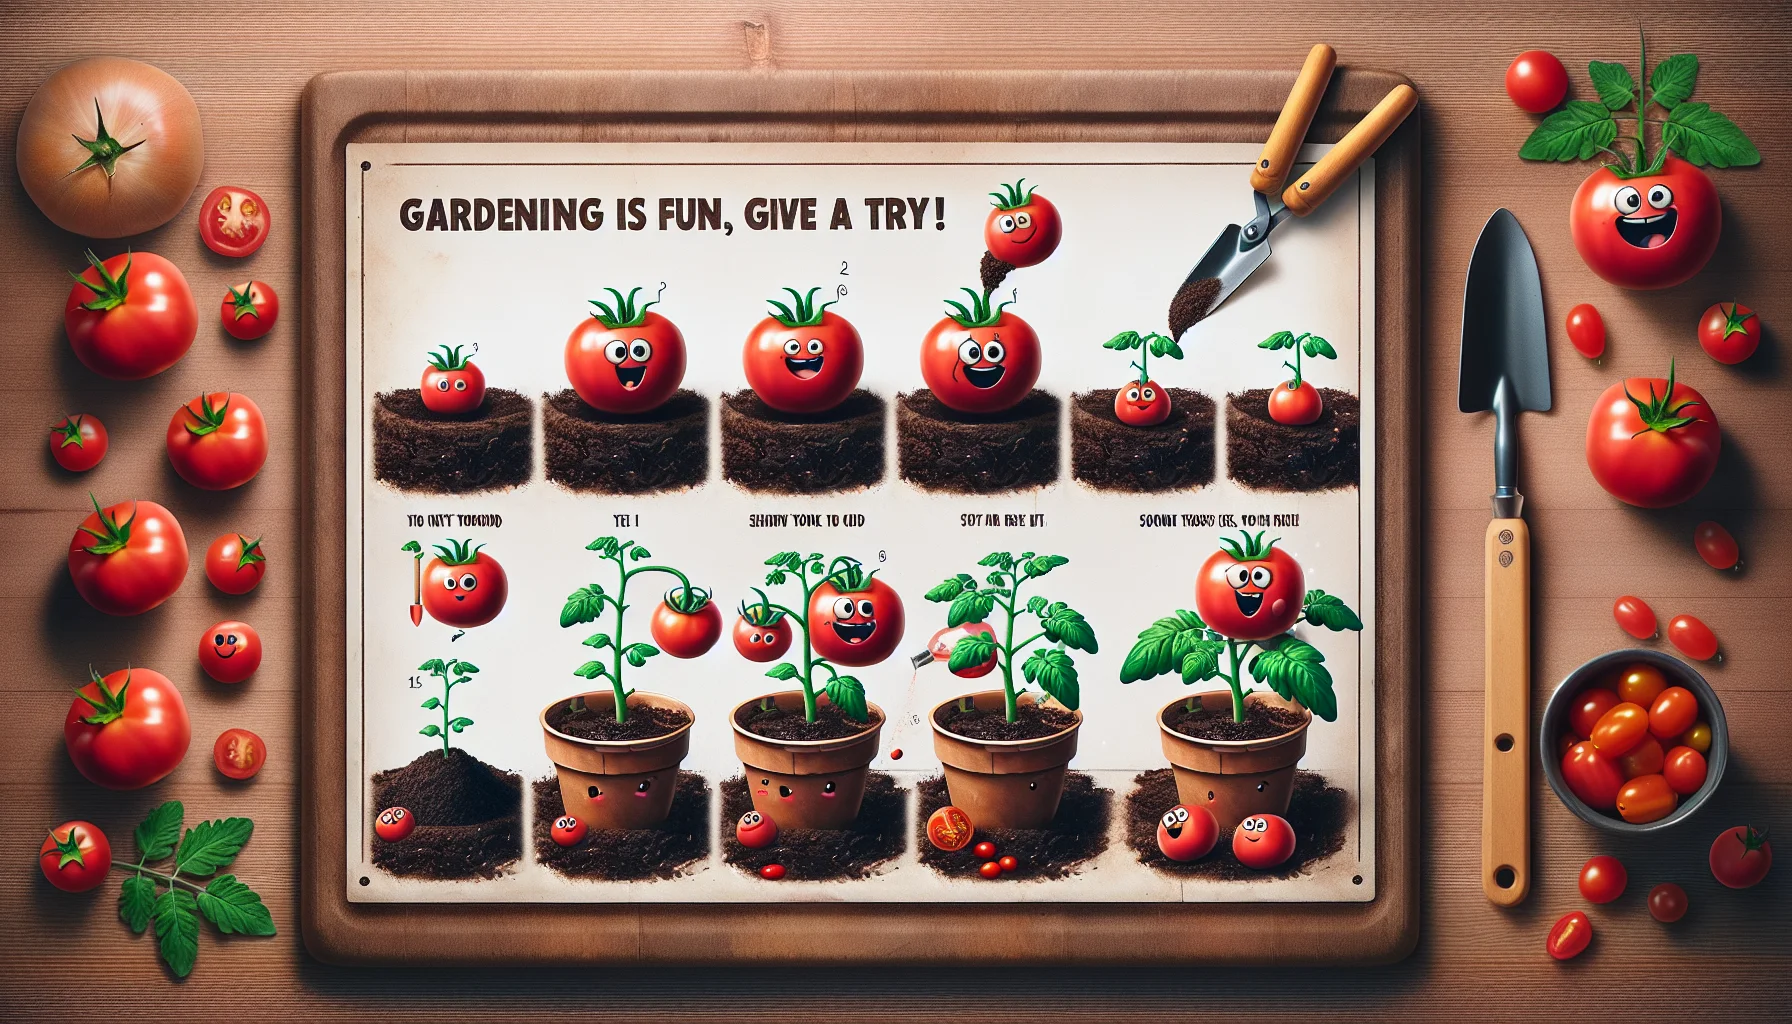 Craft an amusing image demonstrating the steps of nurturing a tomato plant. Showcase every stage from planting a tiny seed in rich soil to producing shiny, ripe red tomatoes. Encapsulate a sense of humor by incorporating light-hearted, whimsical elements such as cartoon-like, over-sized gardening tools or expressively funny vegetables with cheerful faces. Add an encouraging caption saying, 'Gardening is fun, give it a try!' to motivate viewers towards embracing and savouring the experience of gardening.